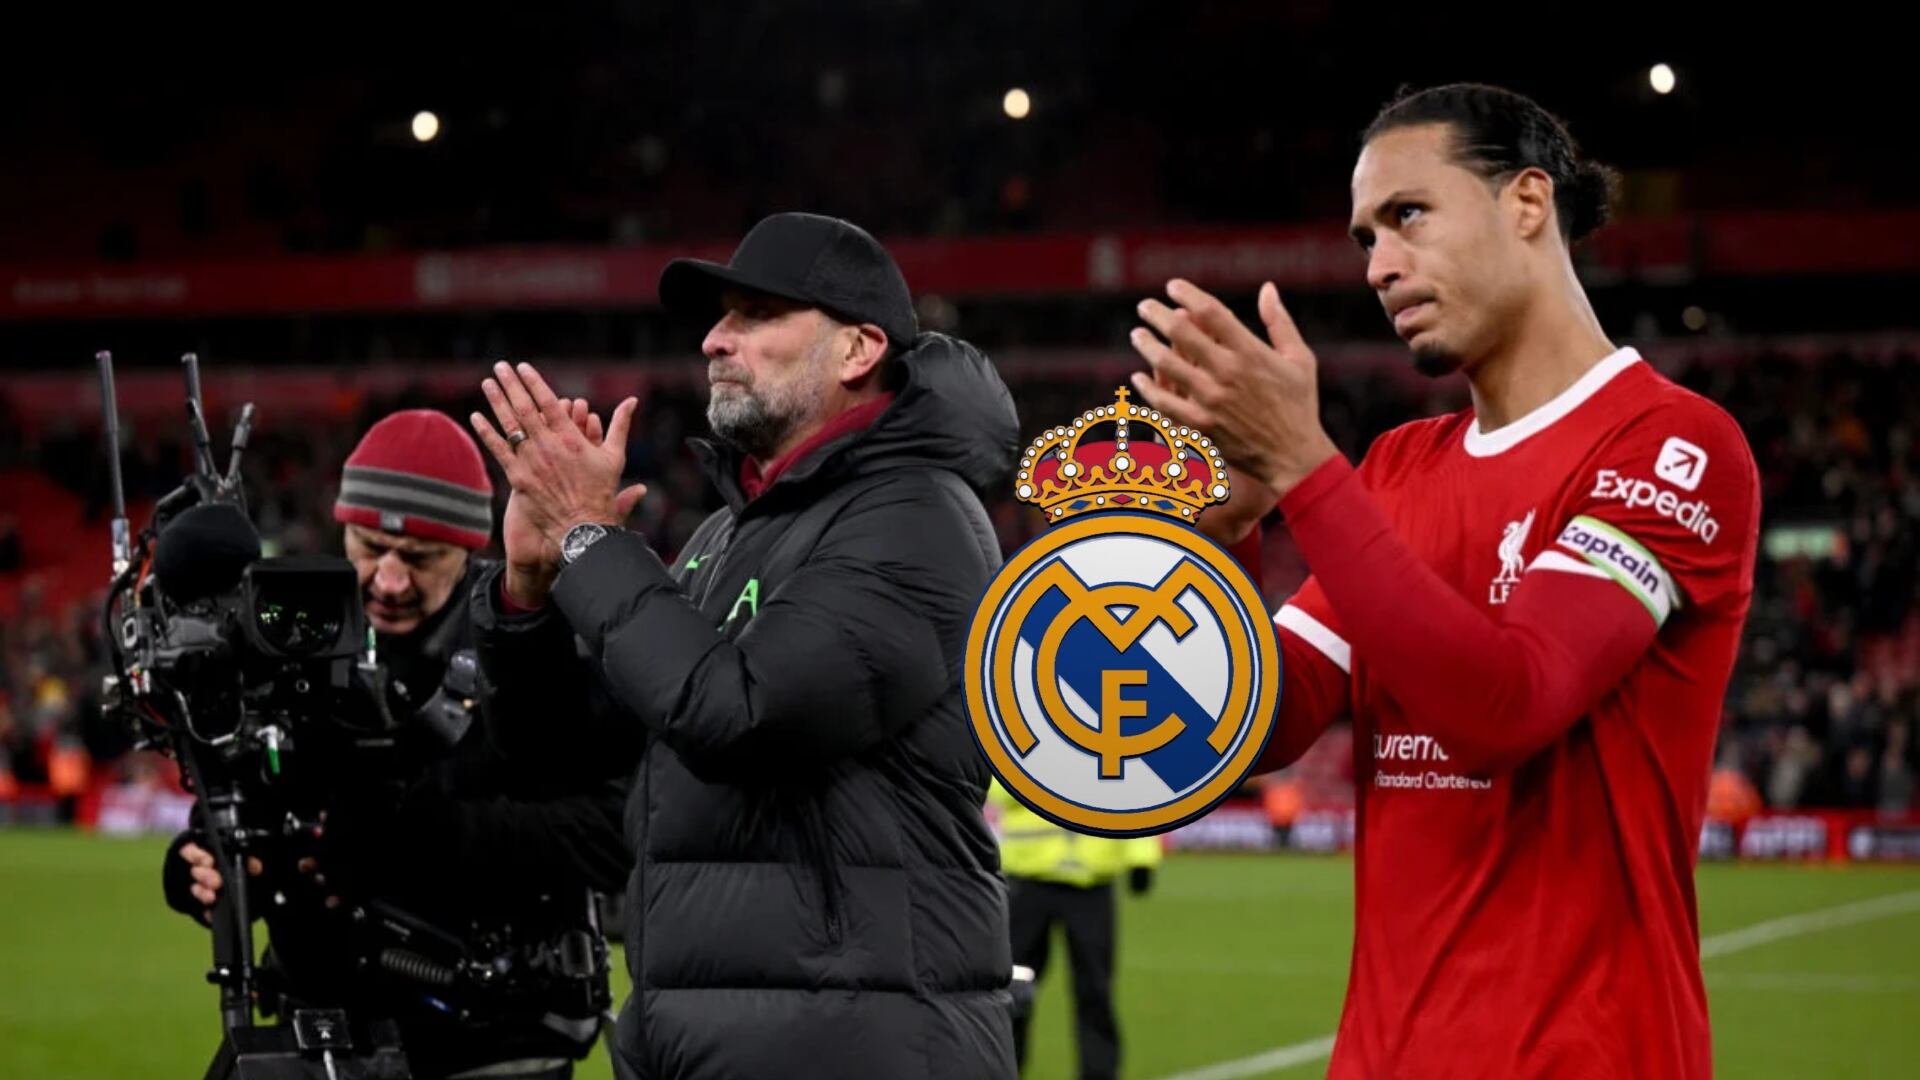 Van Dijk is upset with Klopp’s exit at Liverpool and is the moment for Real Madrid to sign him because of this reason